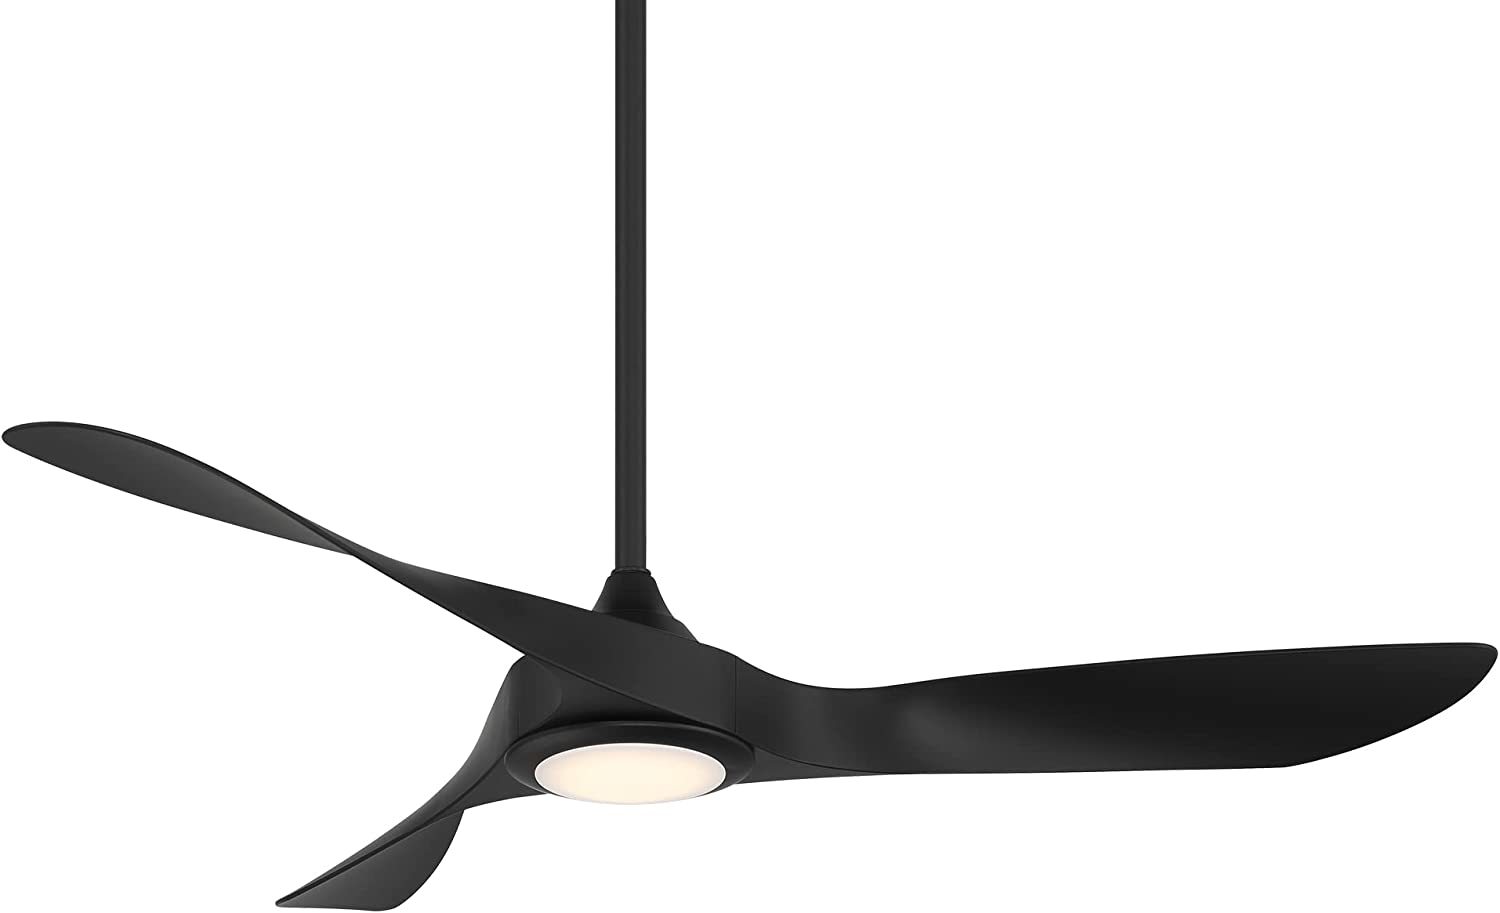 Wac Smart Fans Swirl Indoor And Outdoor 3-Blade Ceiling Fan 54" Matte Black With - $493.93